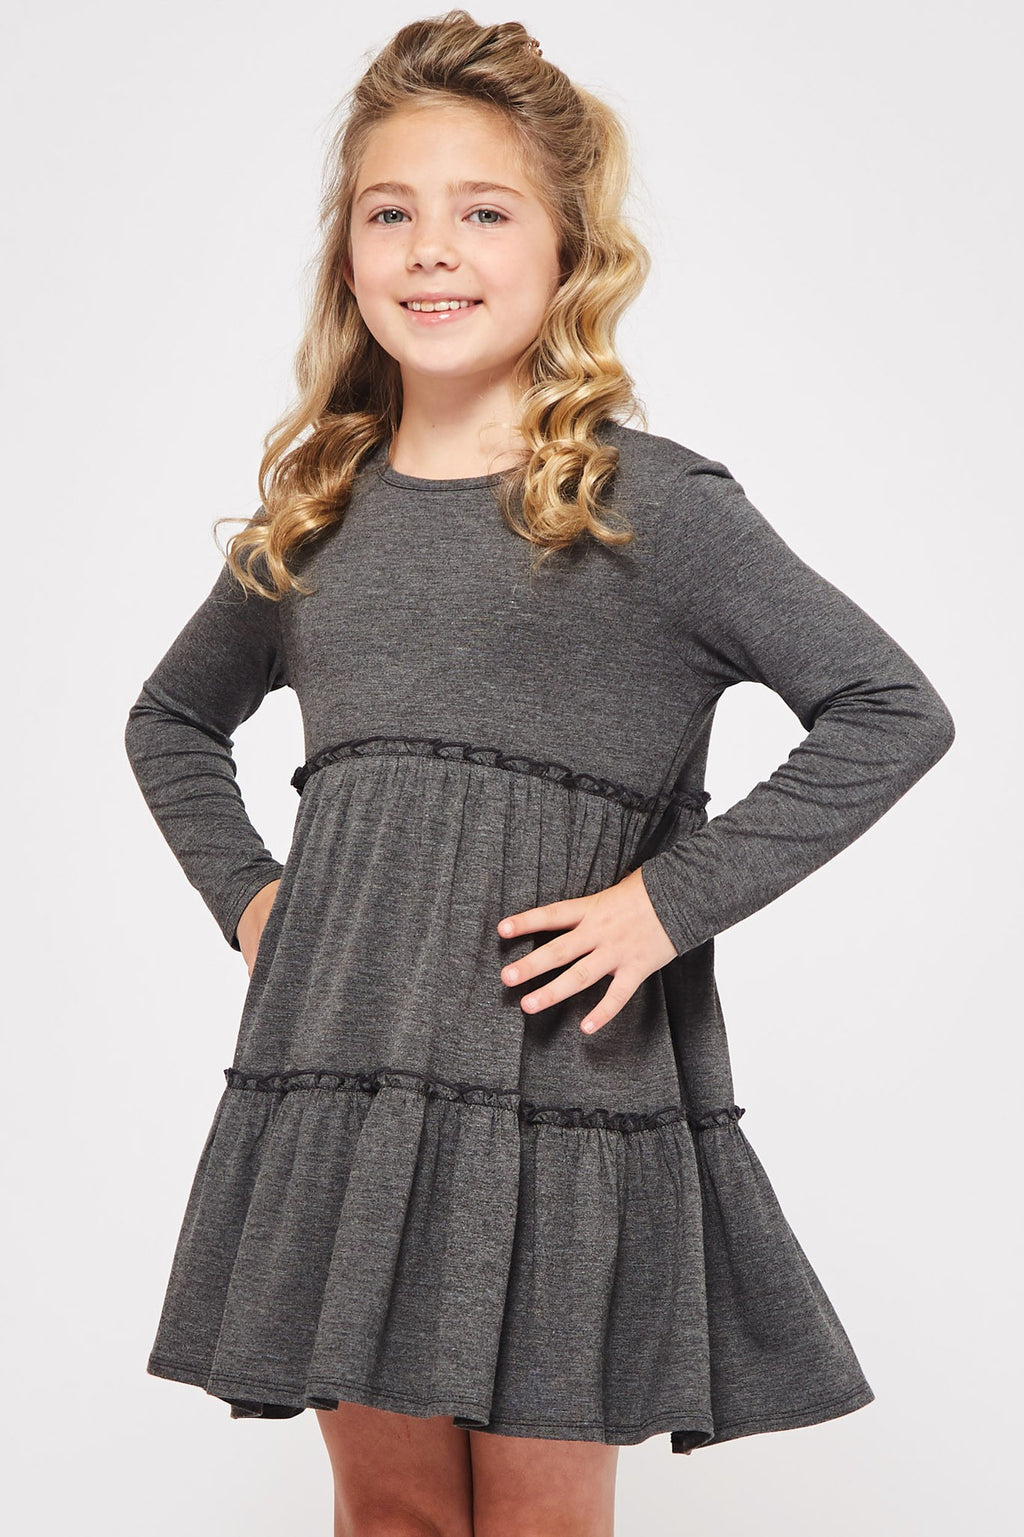 Kids Size Solid Tiered Swing Dress